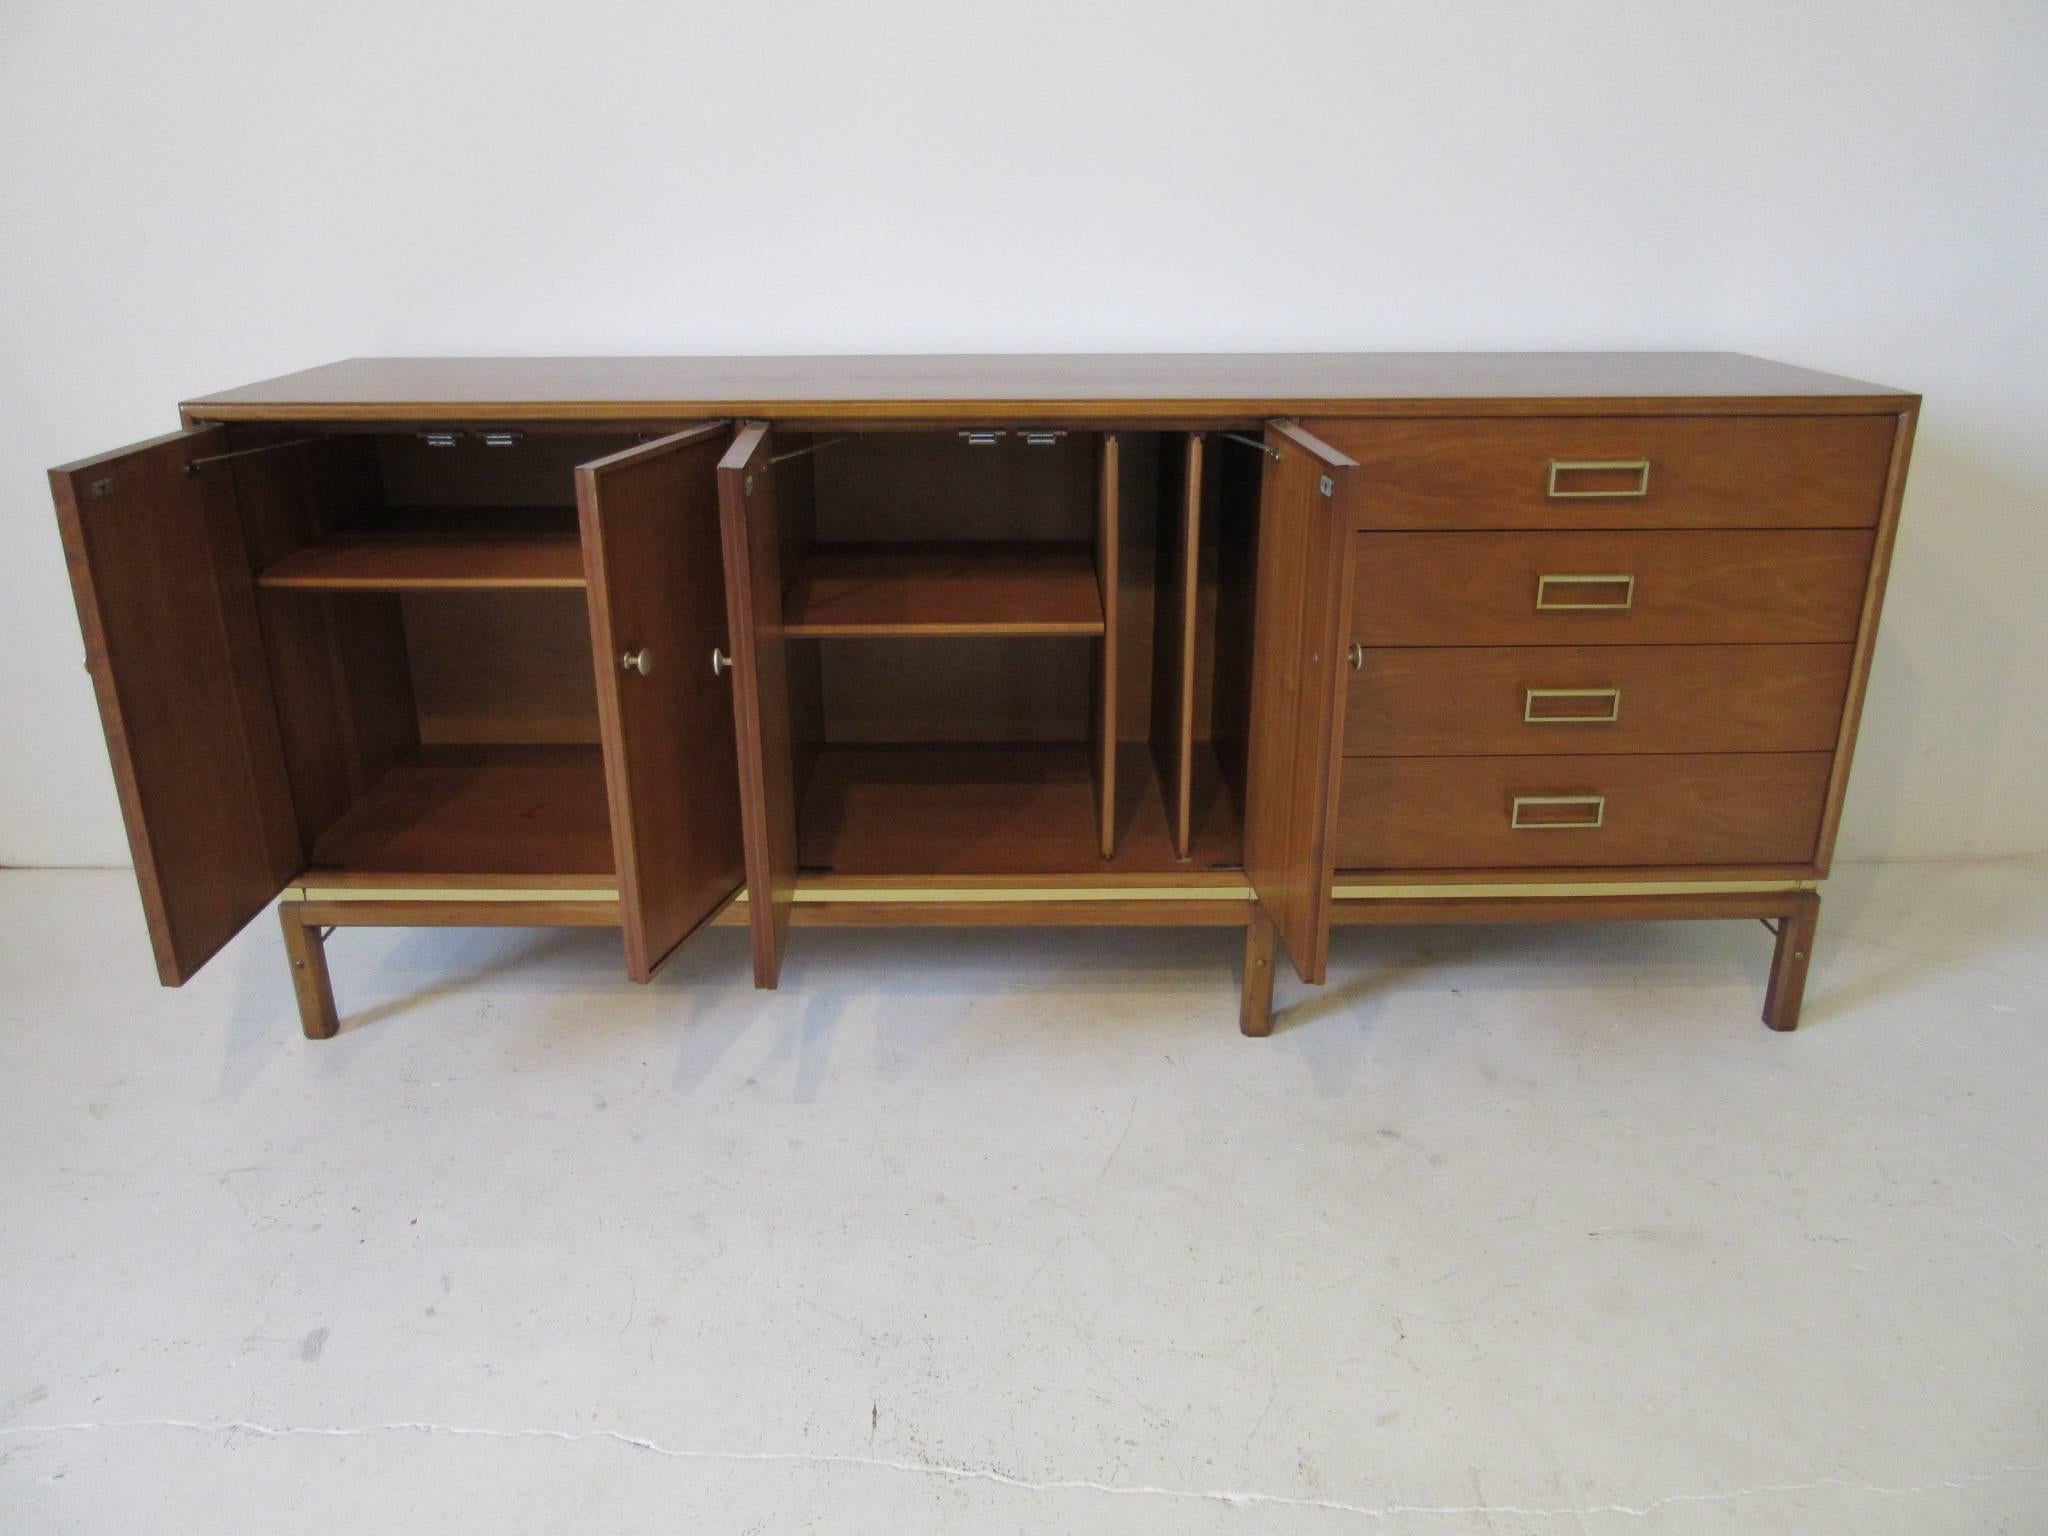 A medium toned mahogany server credenza with brass pulls, lower stretchers and brass details, with double doors, two adjustable shelves and slotted tray or platter storage area. Four drawers with hinged handles are to the right that provide ample